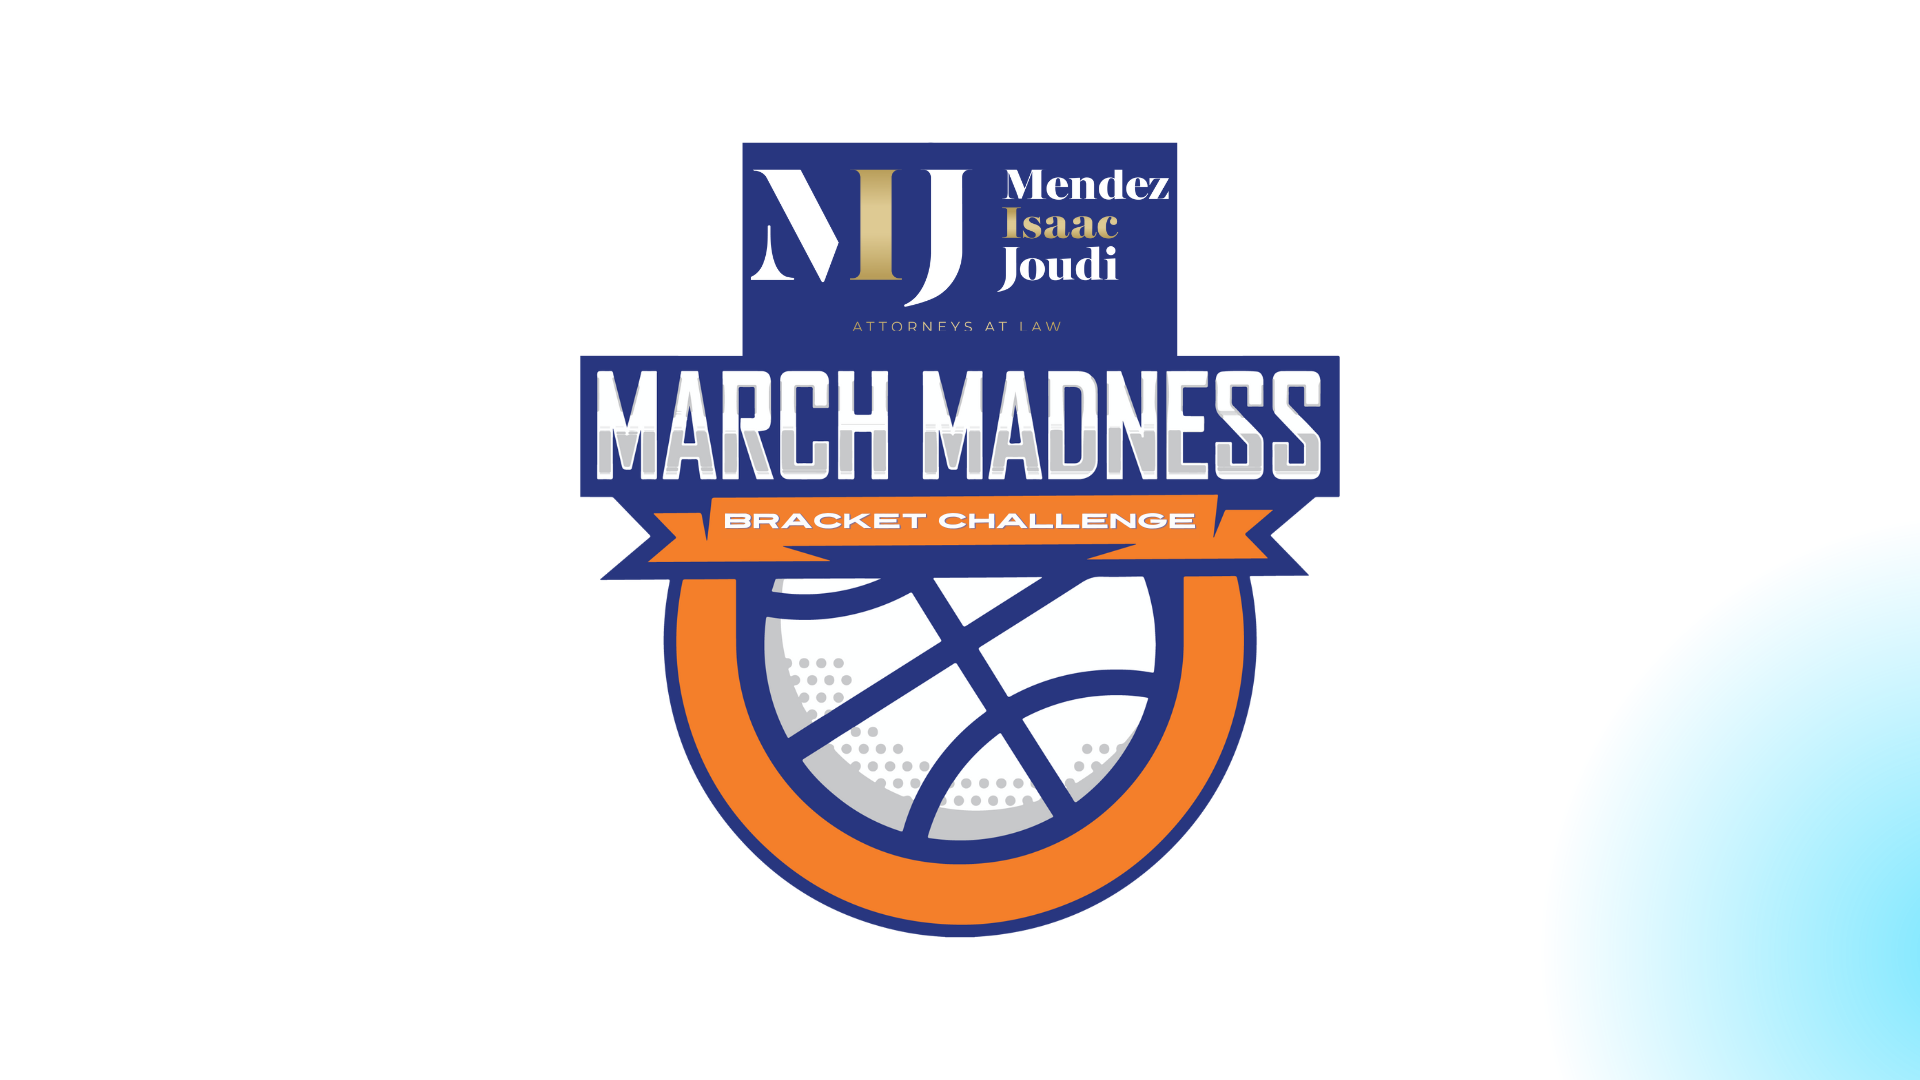 MJ Mendez Isaac Joudi | Attorney At Law | March Madness Bracket Challenge